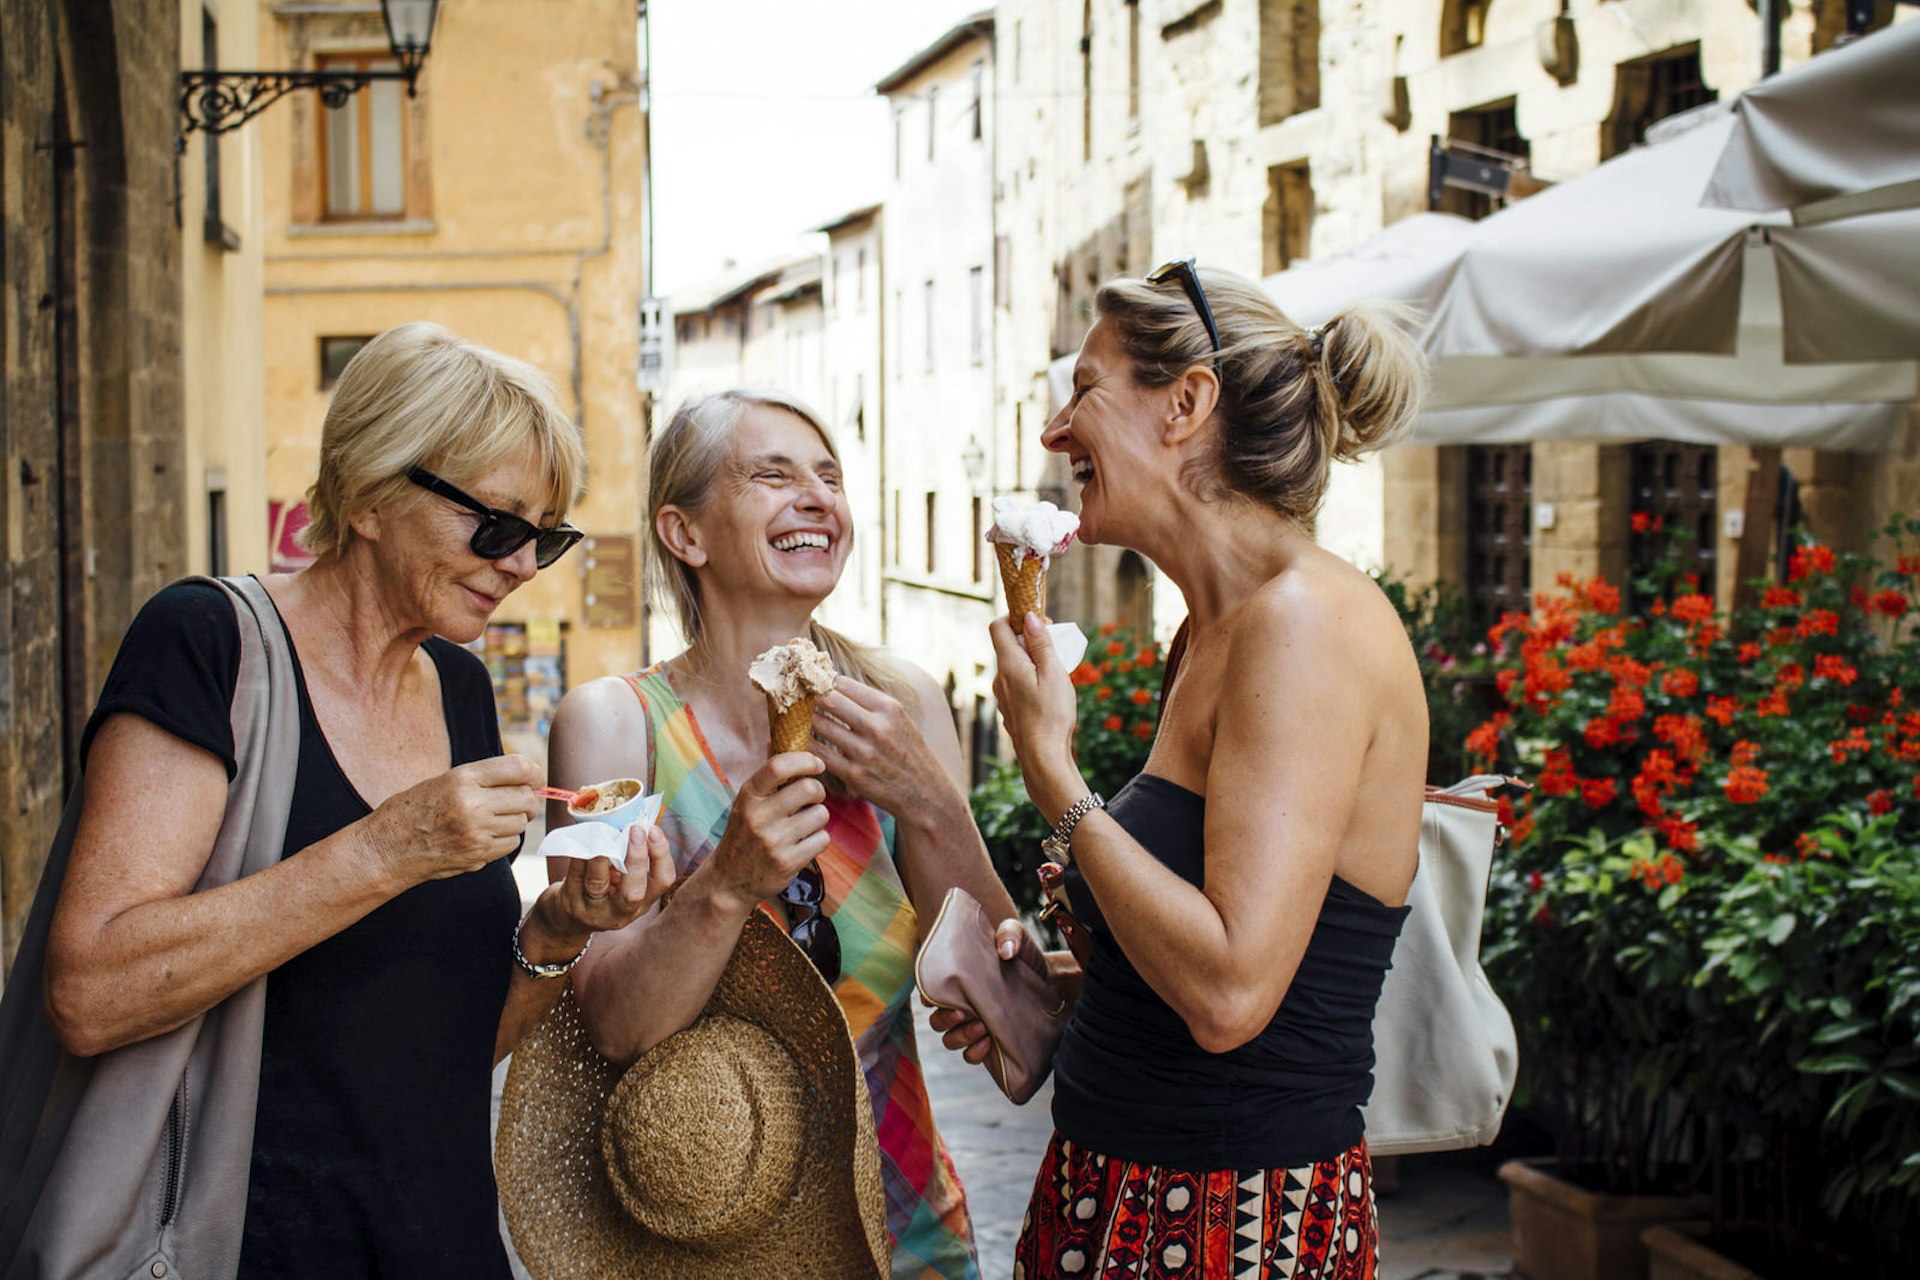 Three women laugh and eat ice cream on a street in Rome.